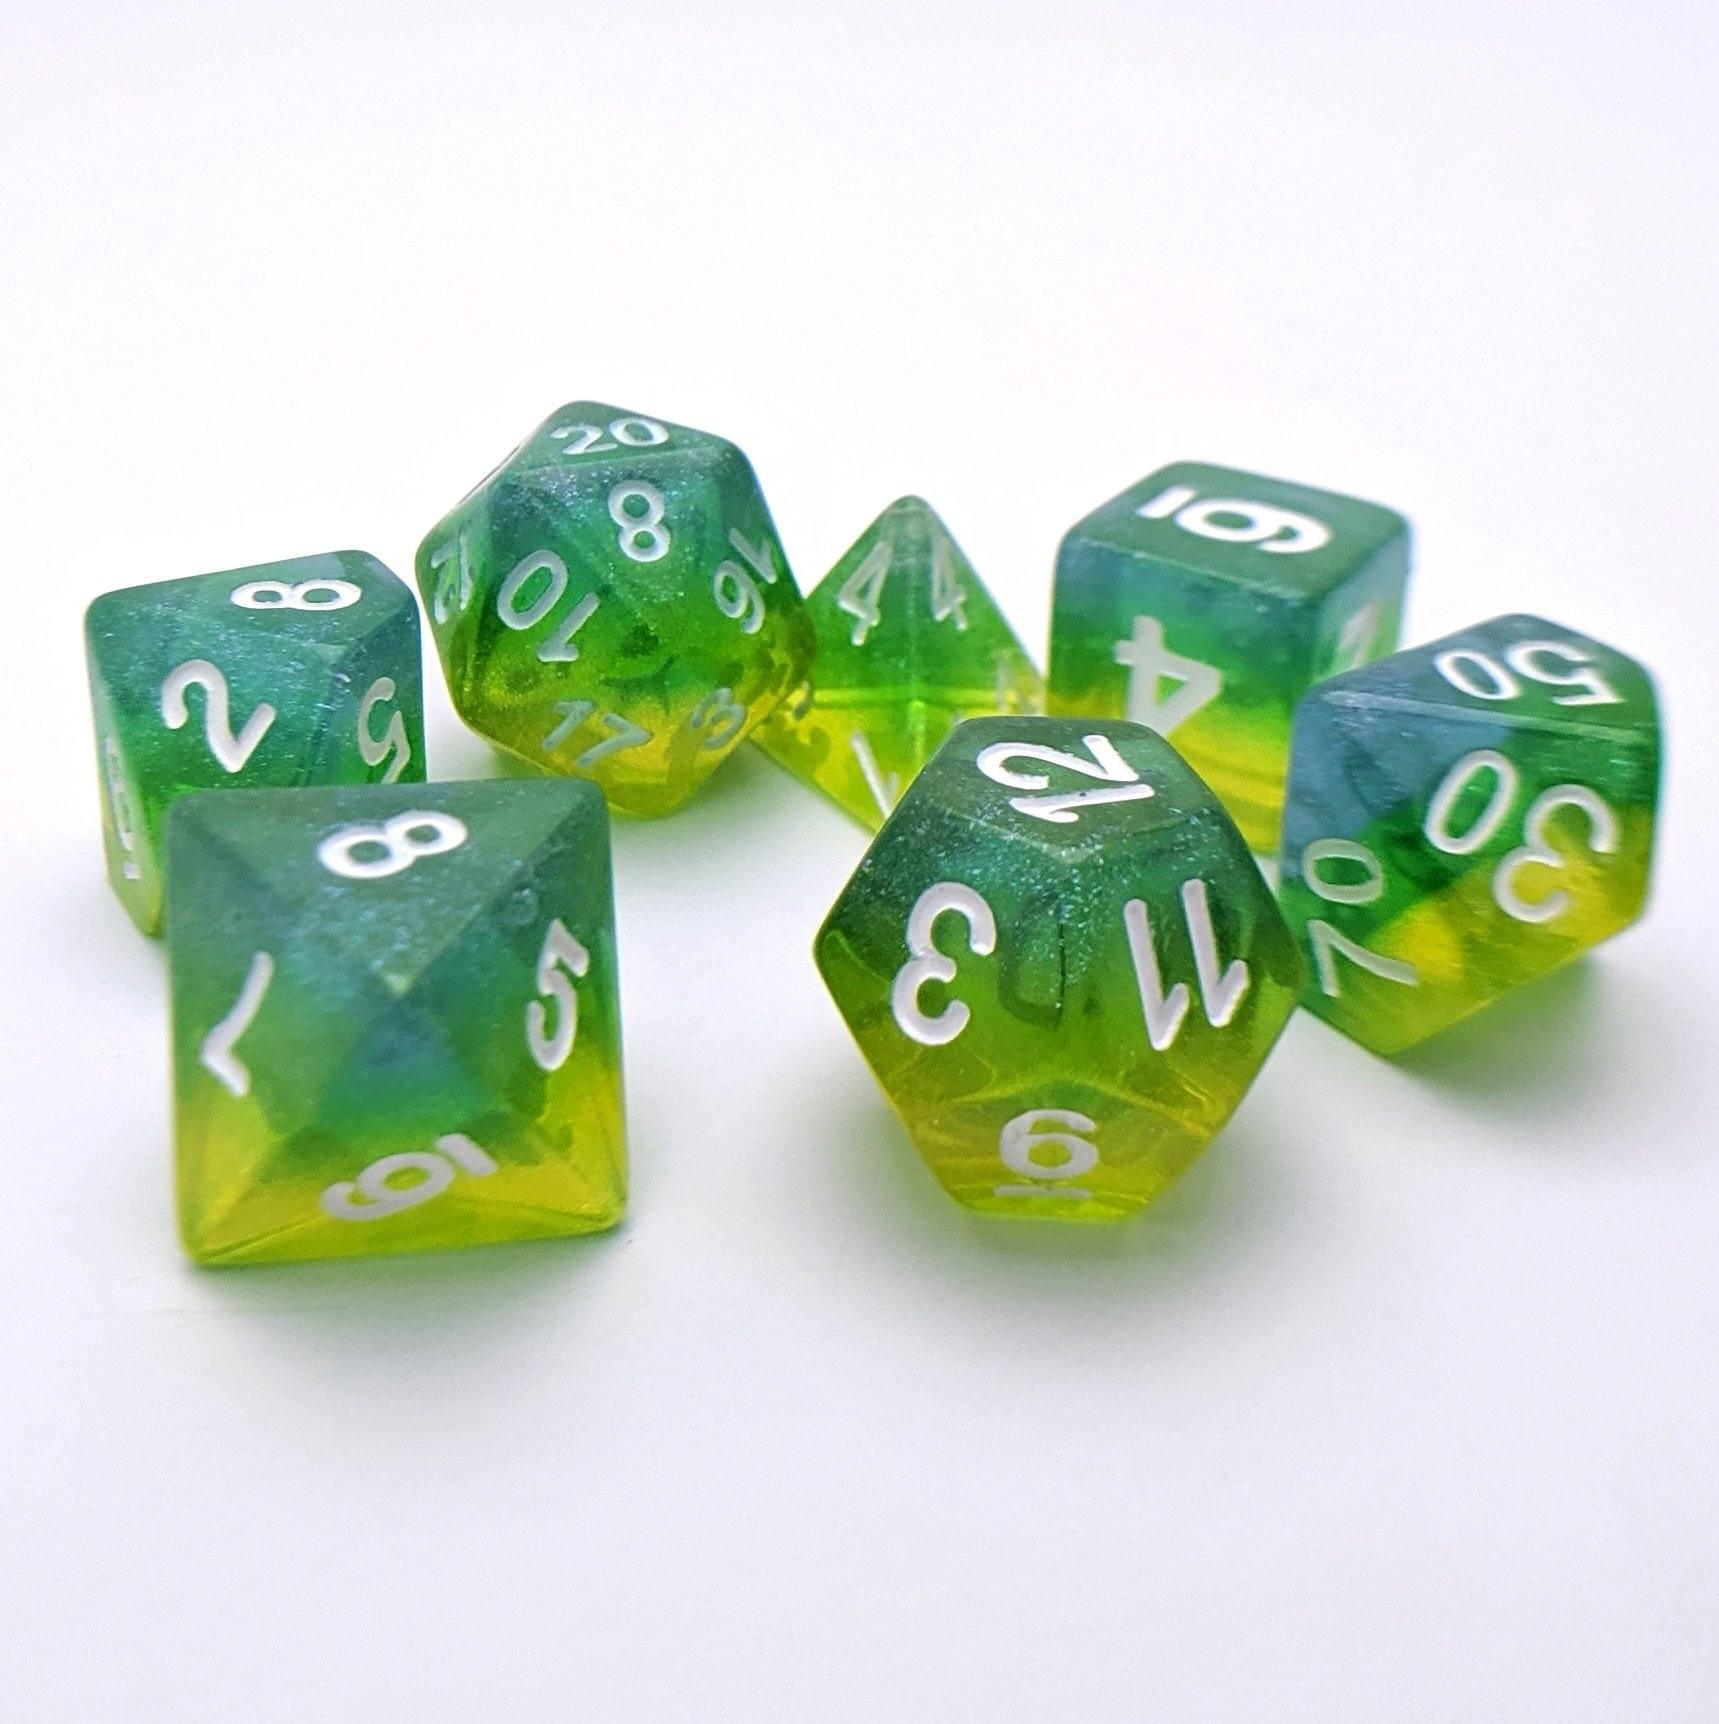 Genesis DnD Dice Set, Blue, green, and yellow Layer Glitter Dice - CozyGamer